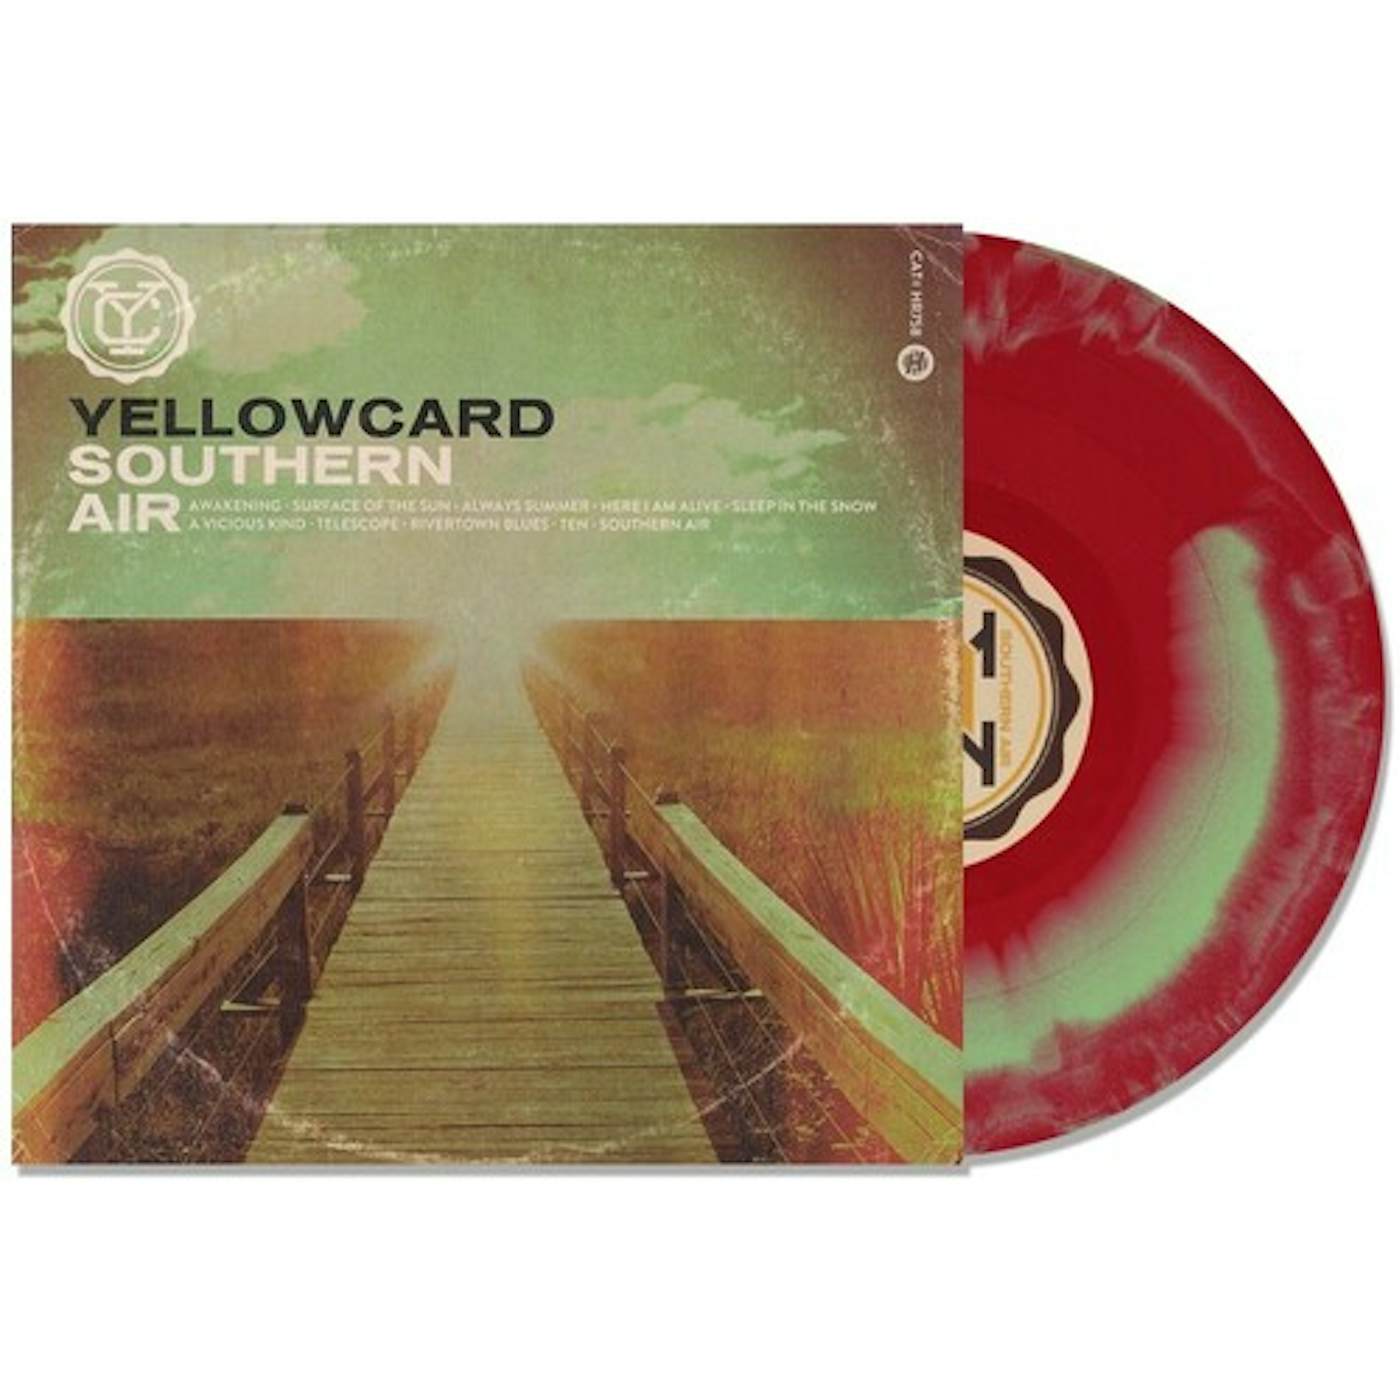 Yellowcard Southern Air (Green and Red Swirl) Vinyl Record